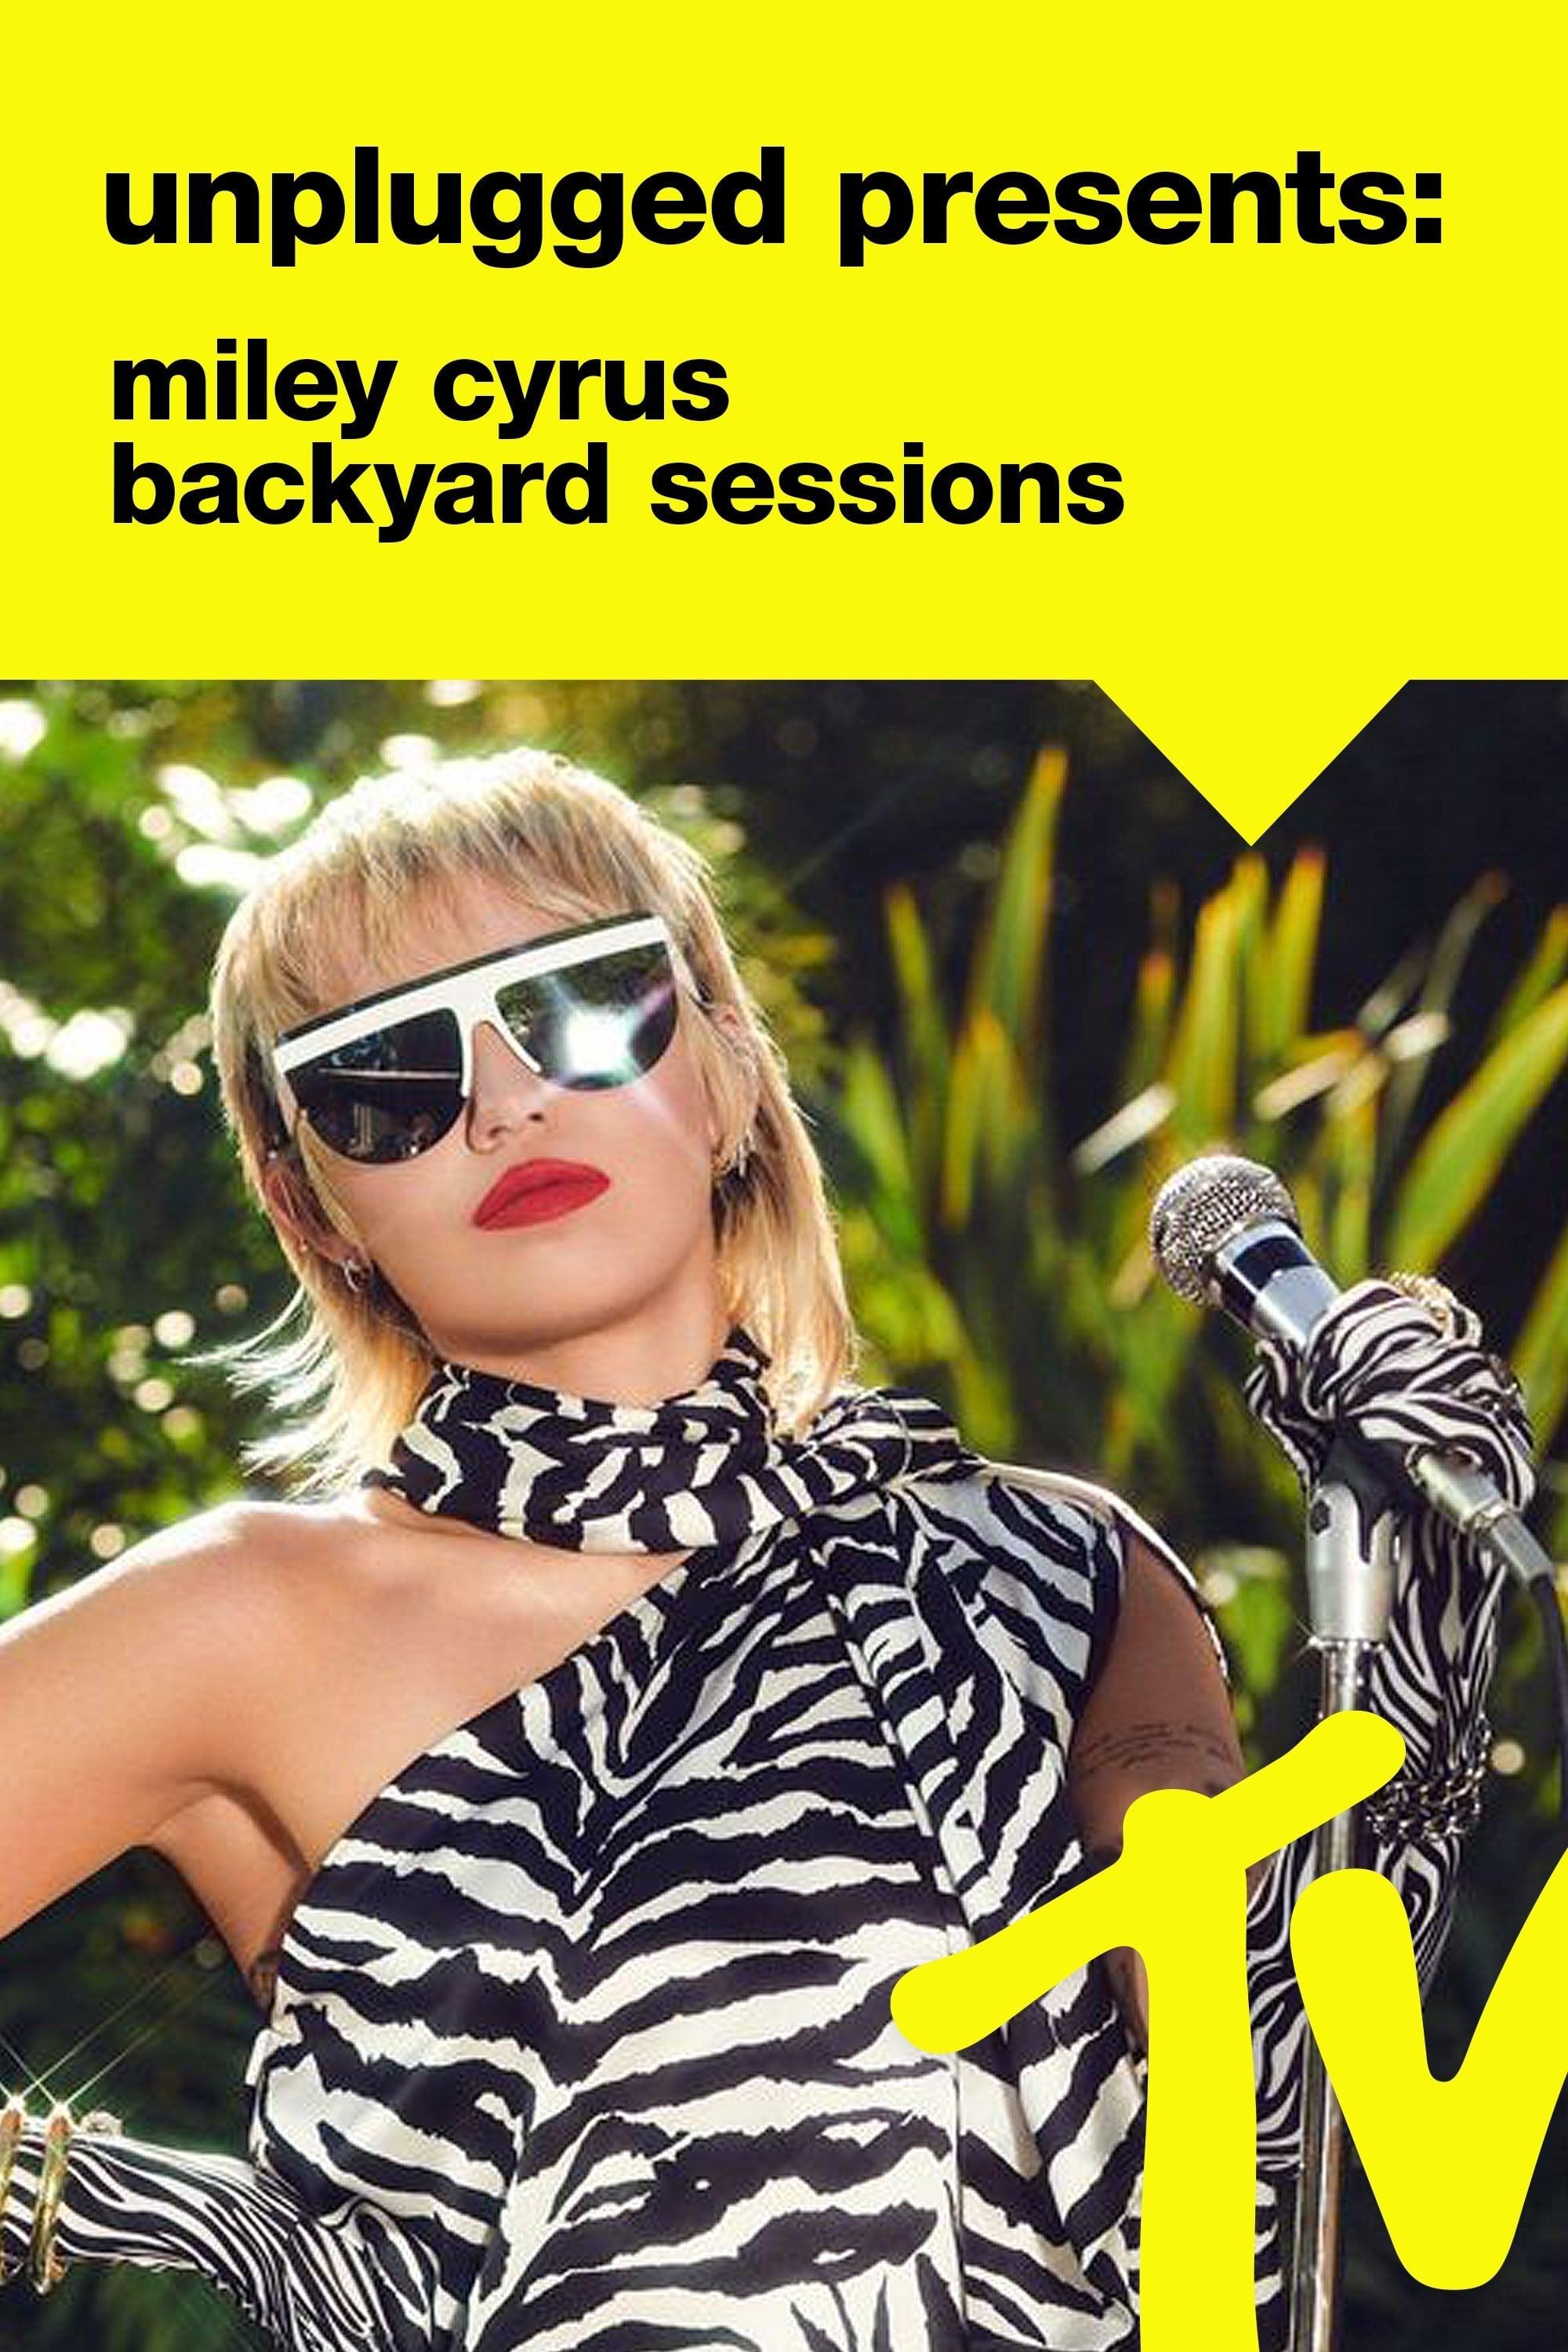 MTV Unplugged Presents: Miley Cyrus Backyard Sessions poster